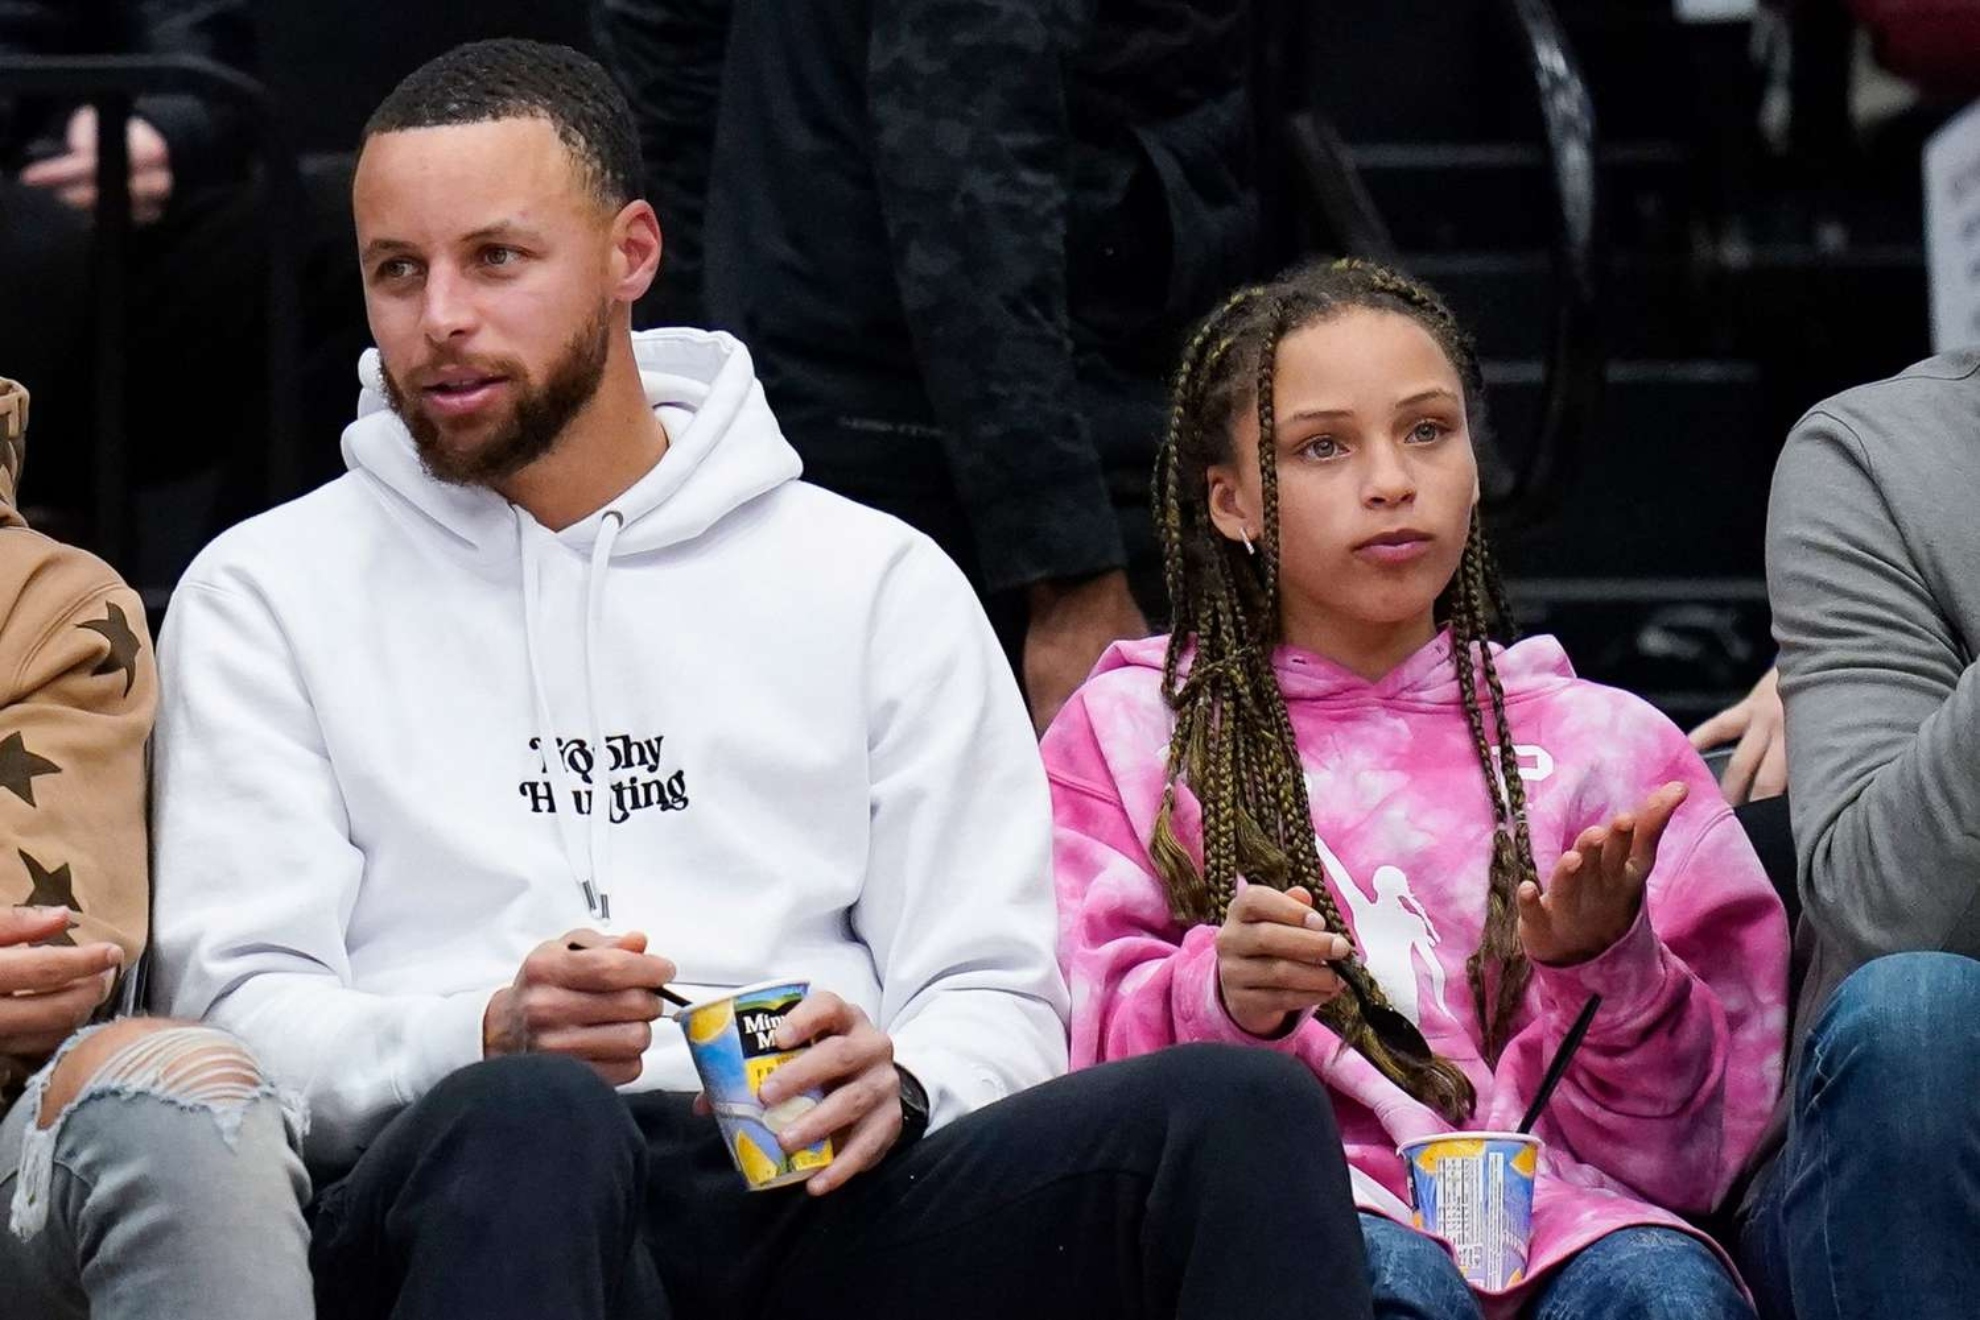 Riley Curry: The rising volleyball prodigy following in her father's footsteps